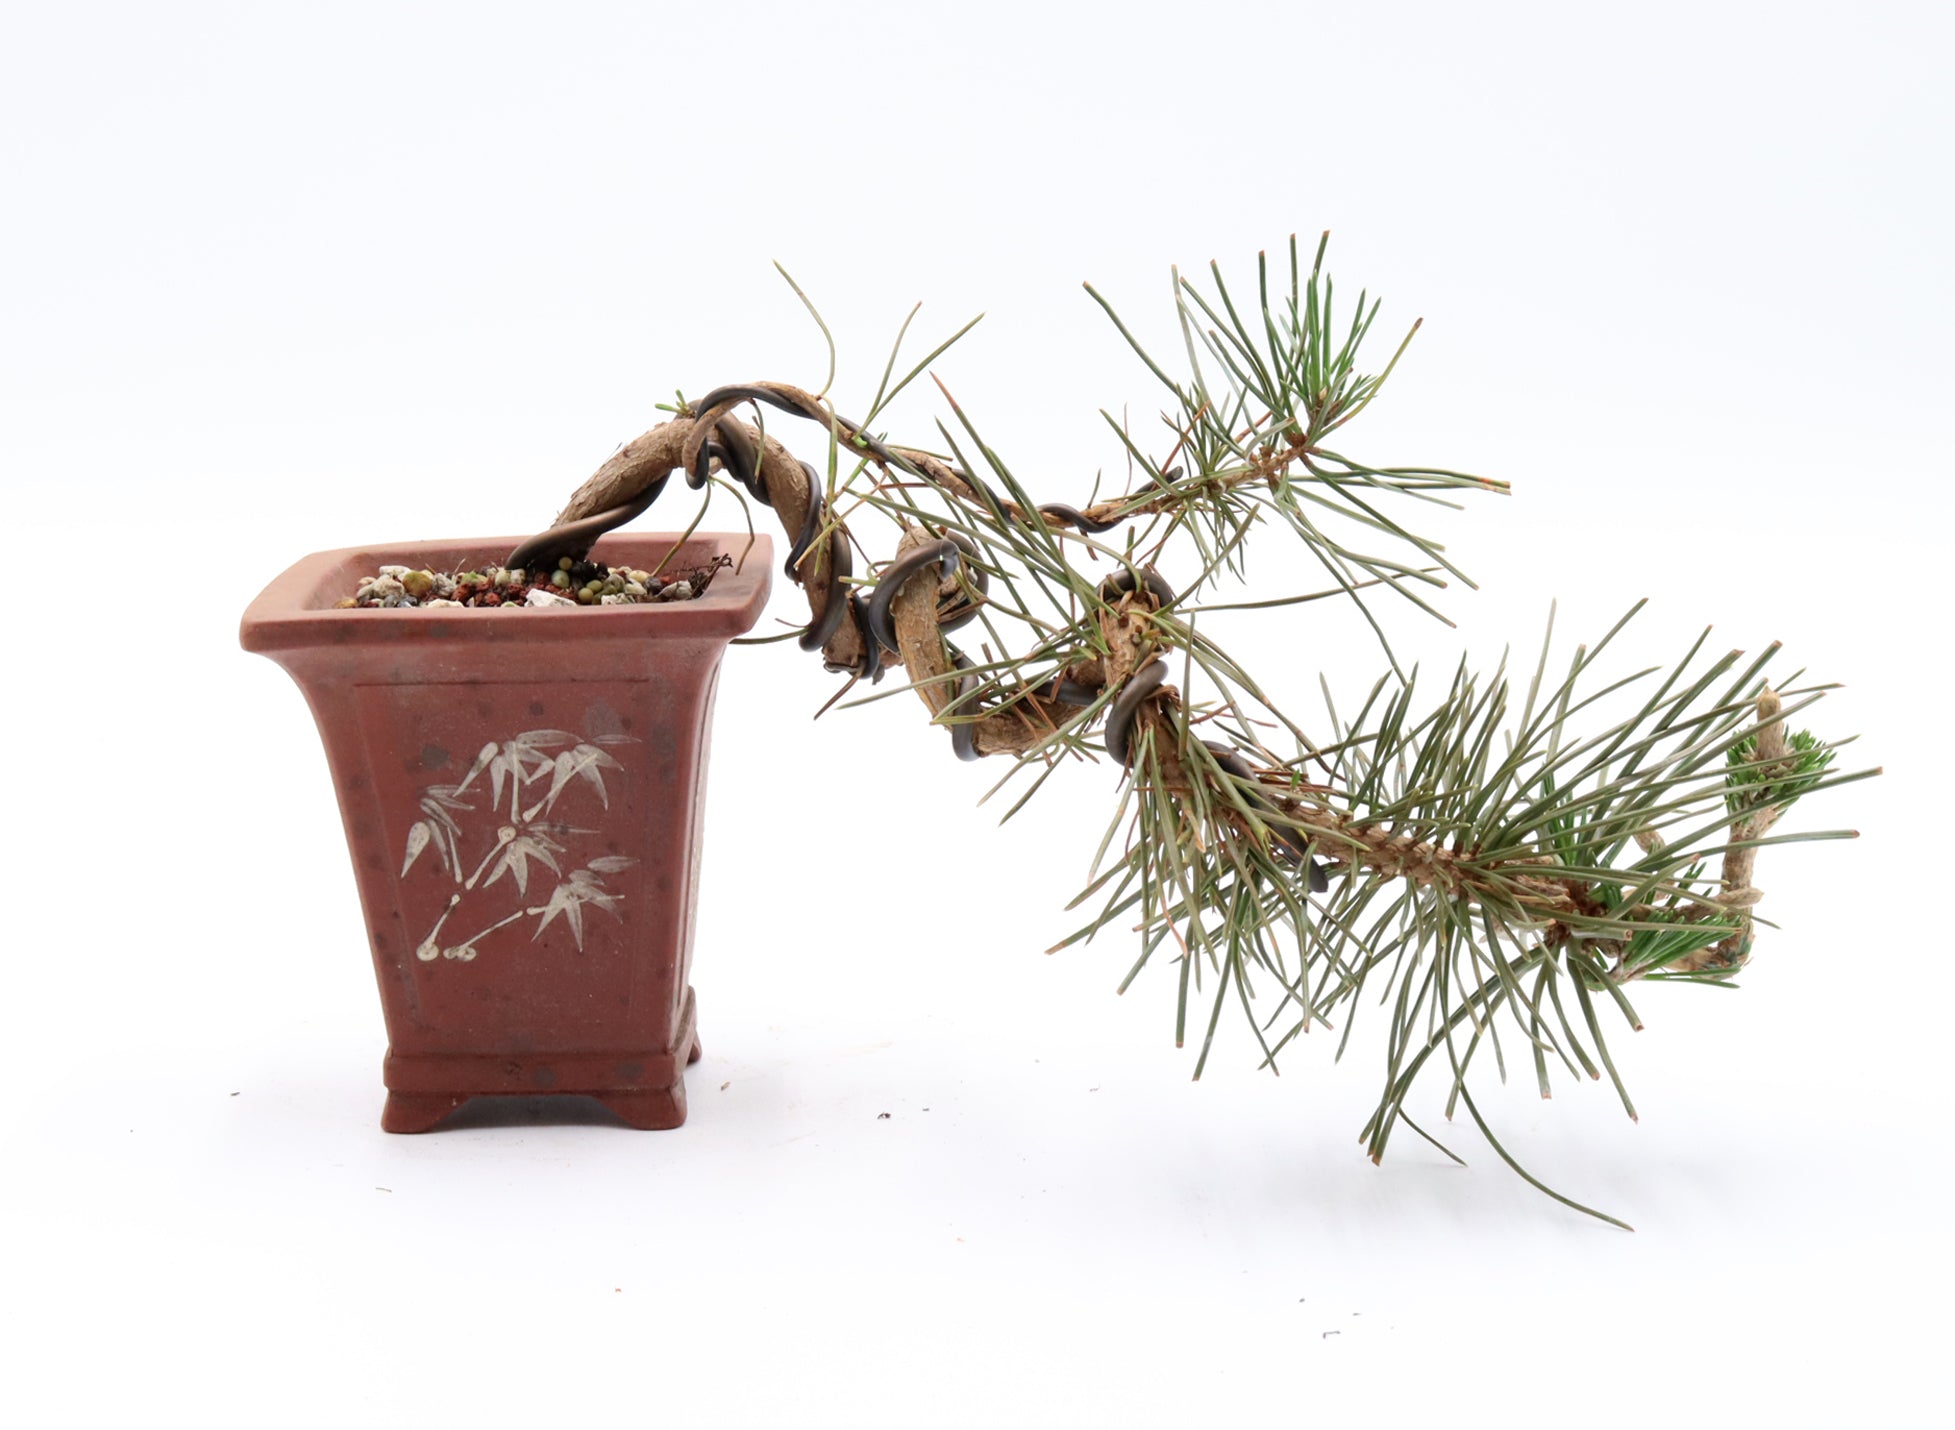 Wired Japanese Black Pine in a Yixing Pot